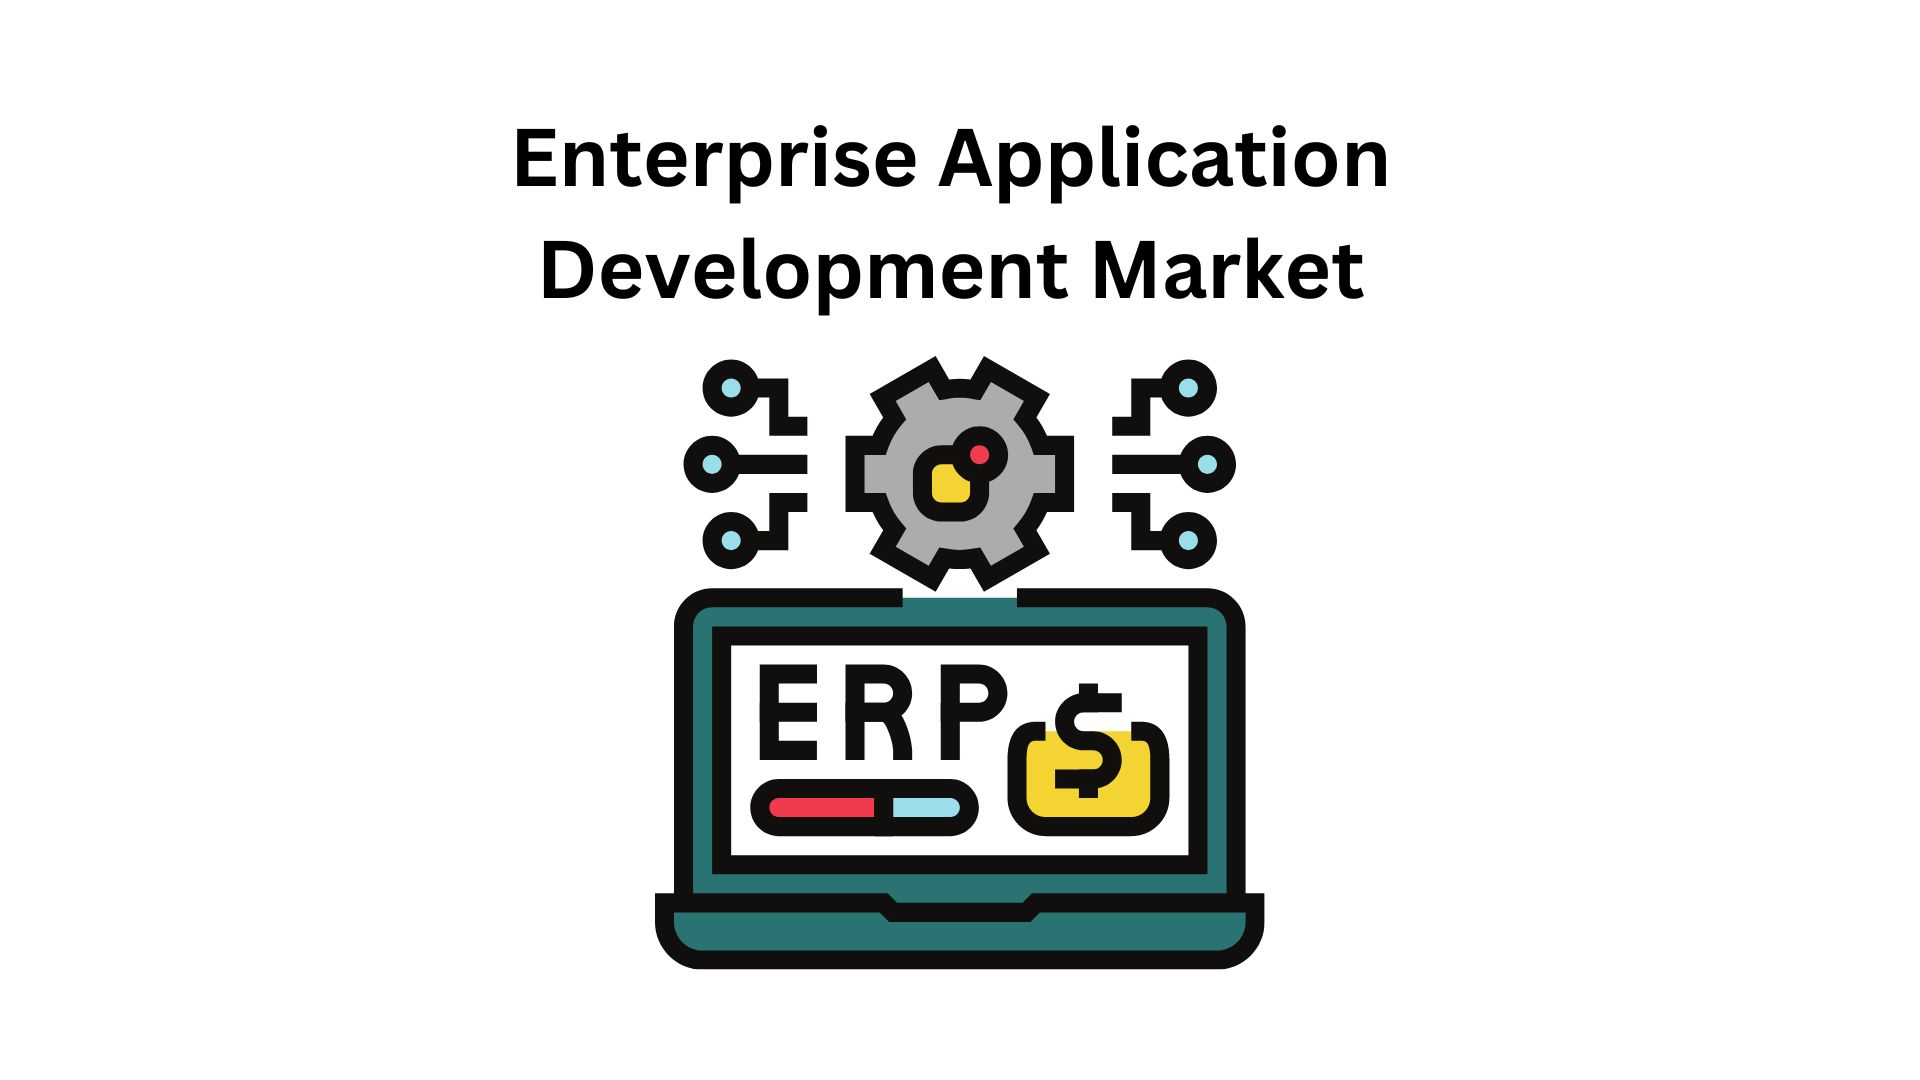 Enterprise Application Development Market expected to grow at a CAGR of 9.4% from 2023 to 2033